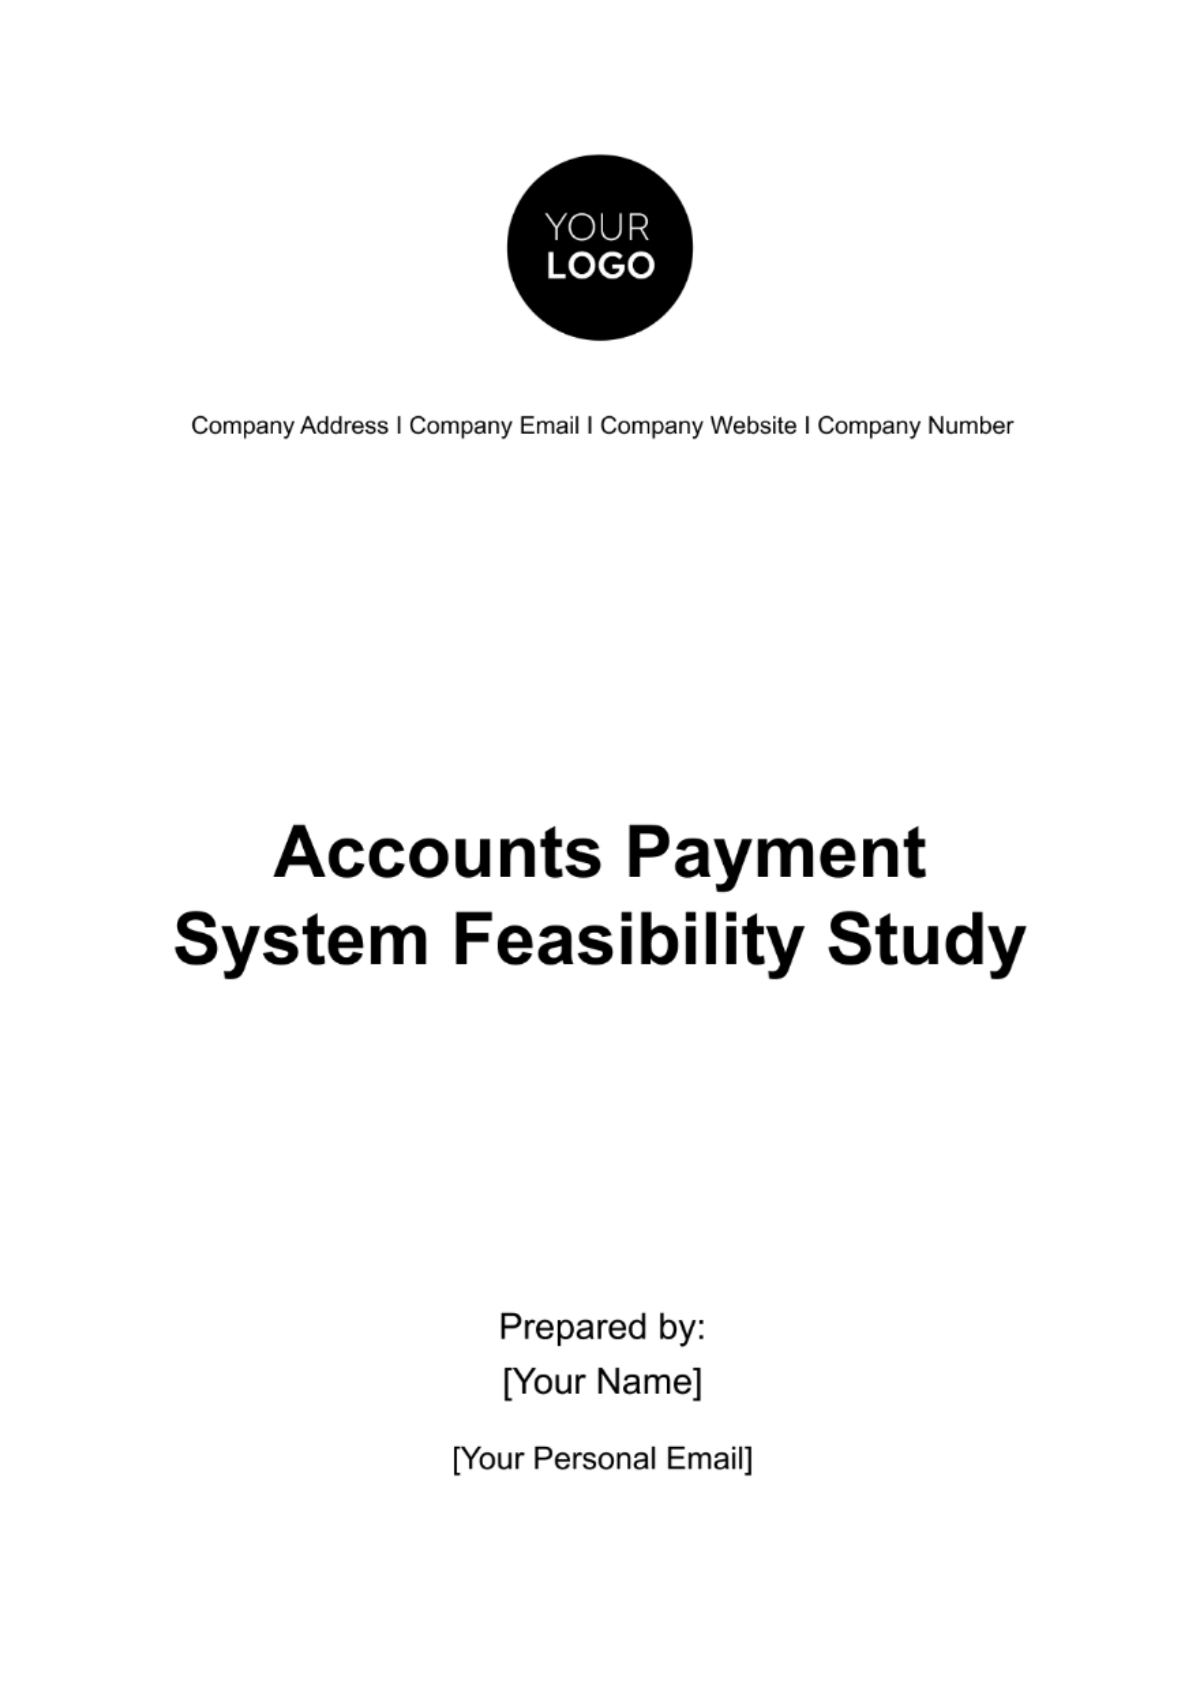 Accounts Payment System Feasibility Study Template